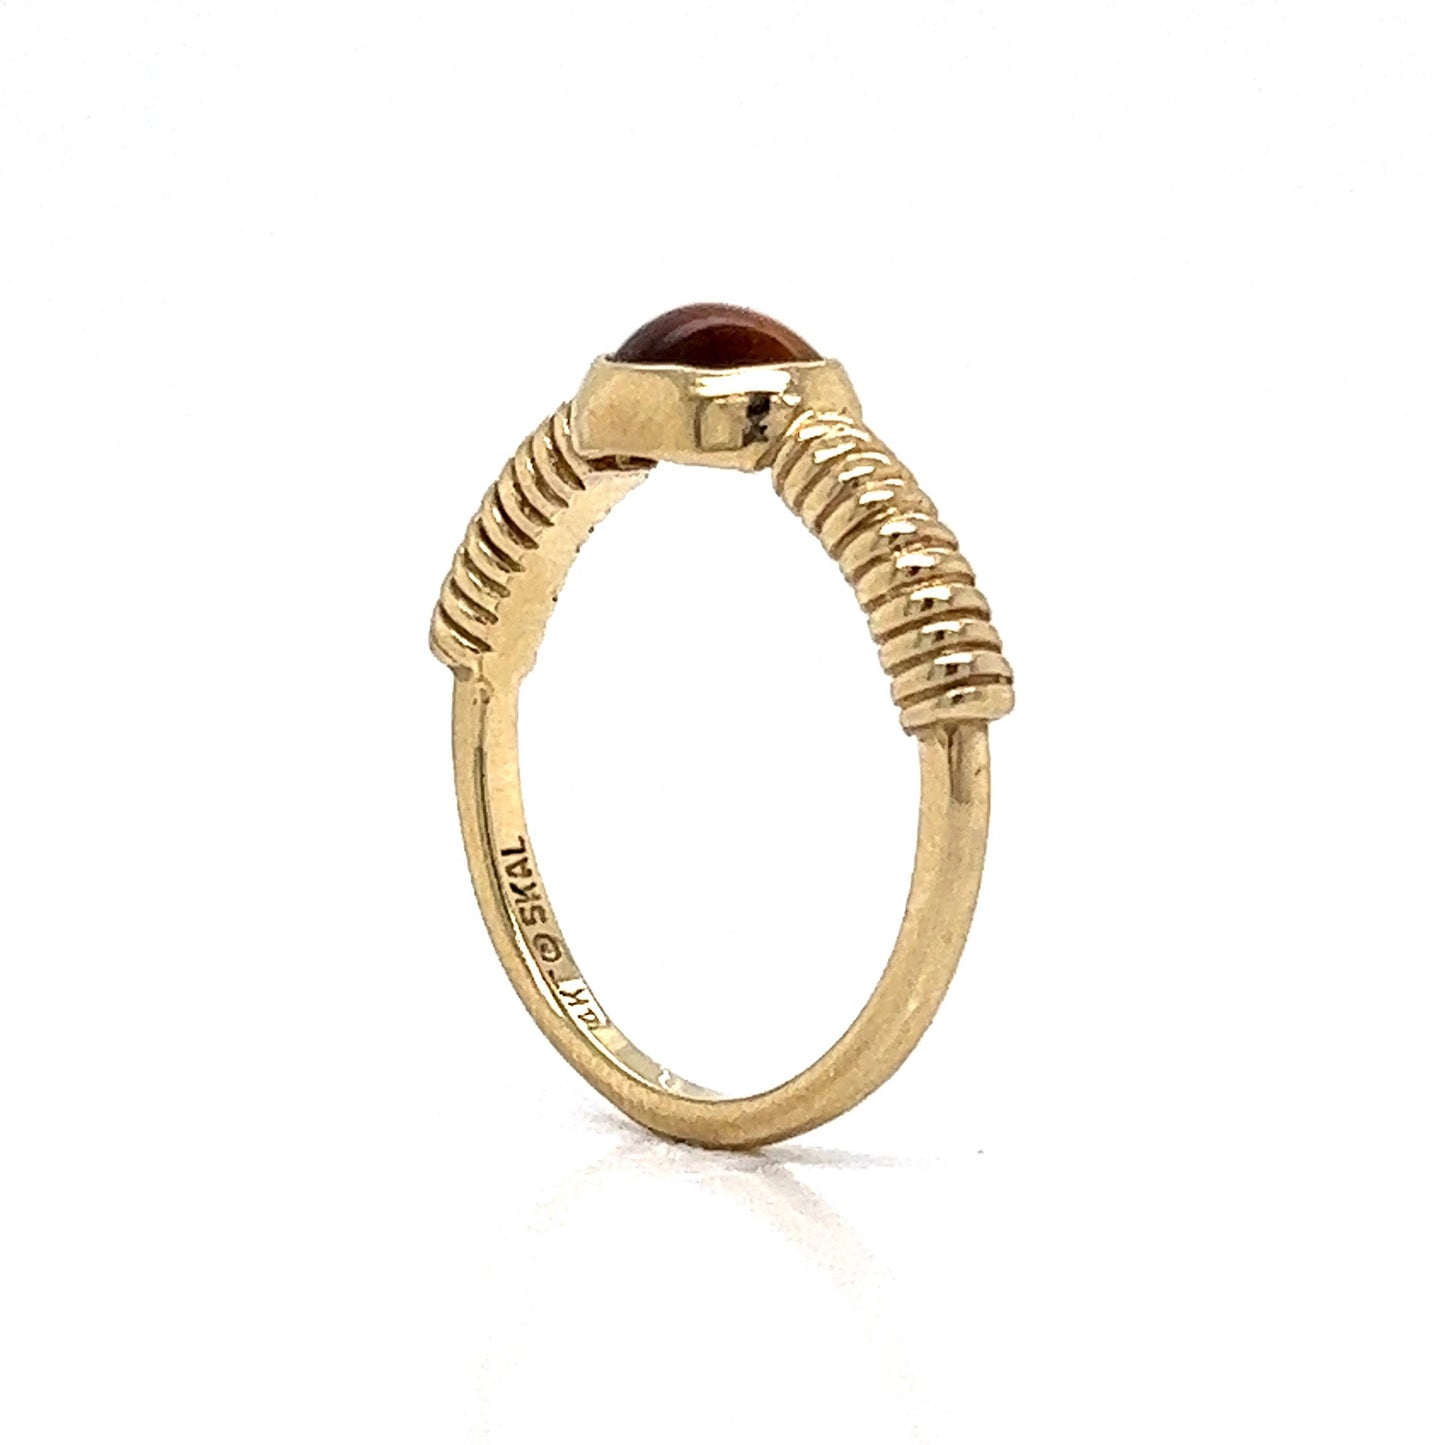 Oval Tiger's Eye Stacking Ring in 14k Yellow Gold